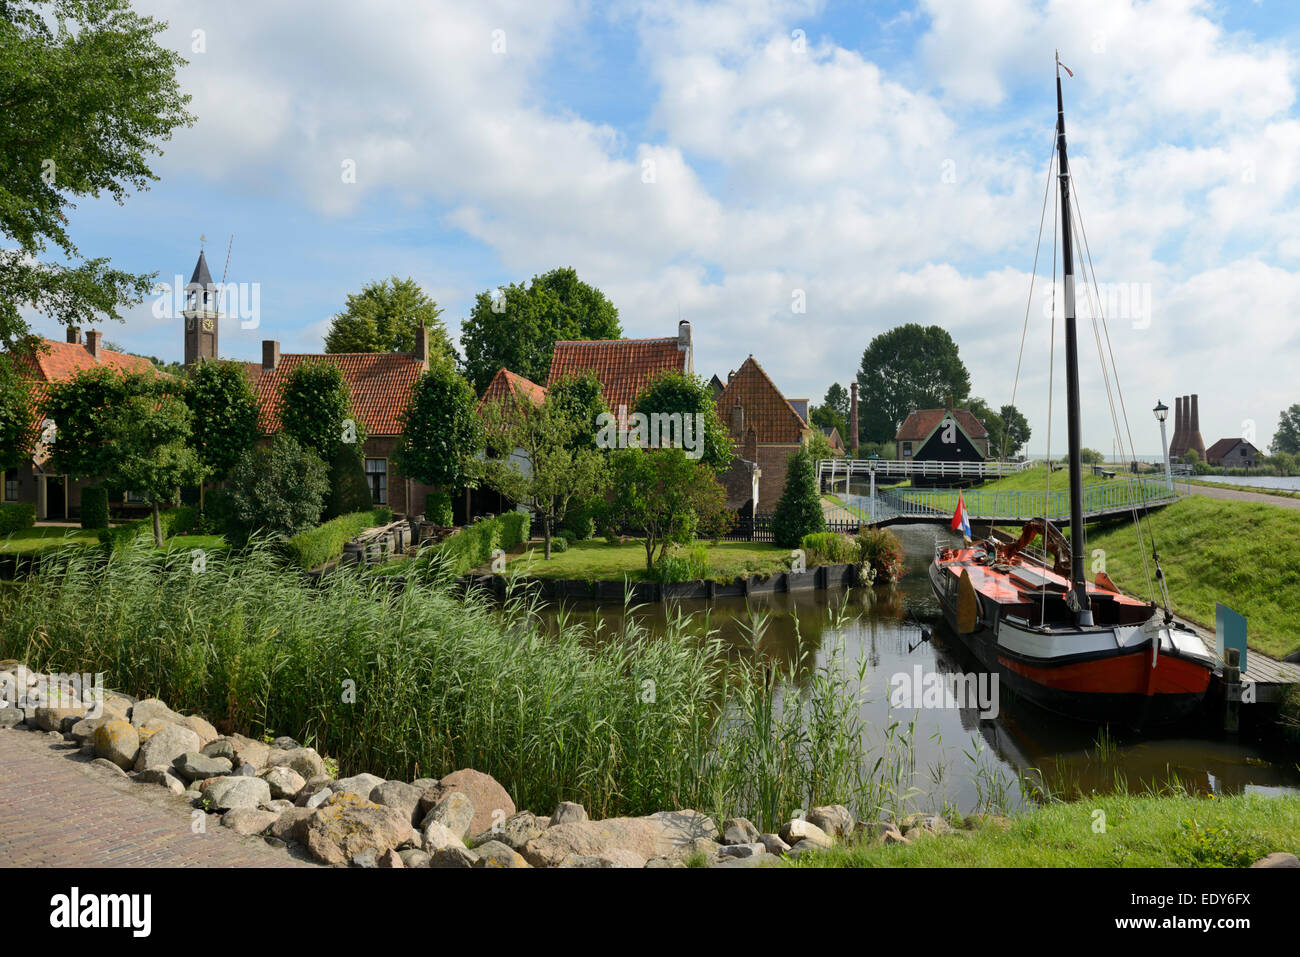 Canal and buildings, Zuidersee open air museum, Lake Ijssel, Enkhuizen, North Holland, Netherlands, Europe Stock Photo